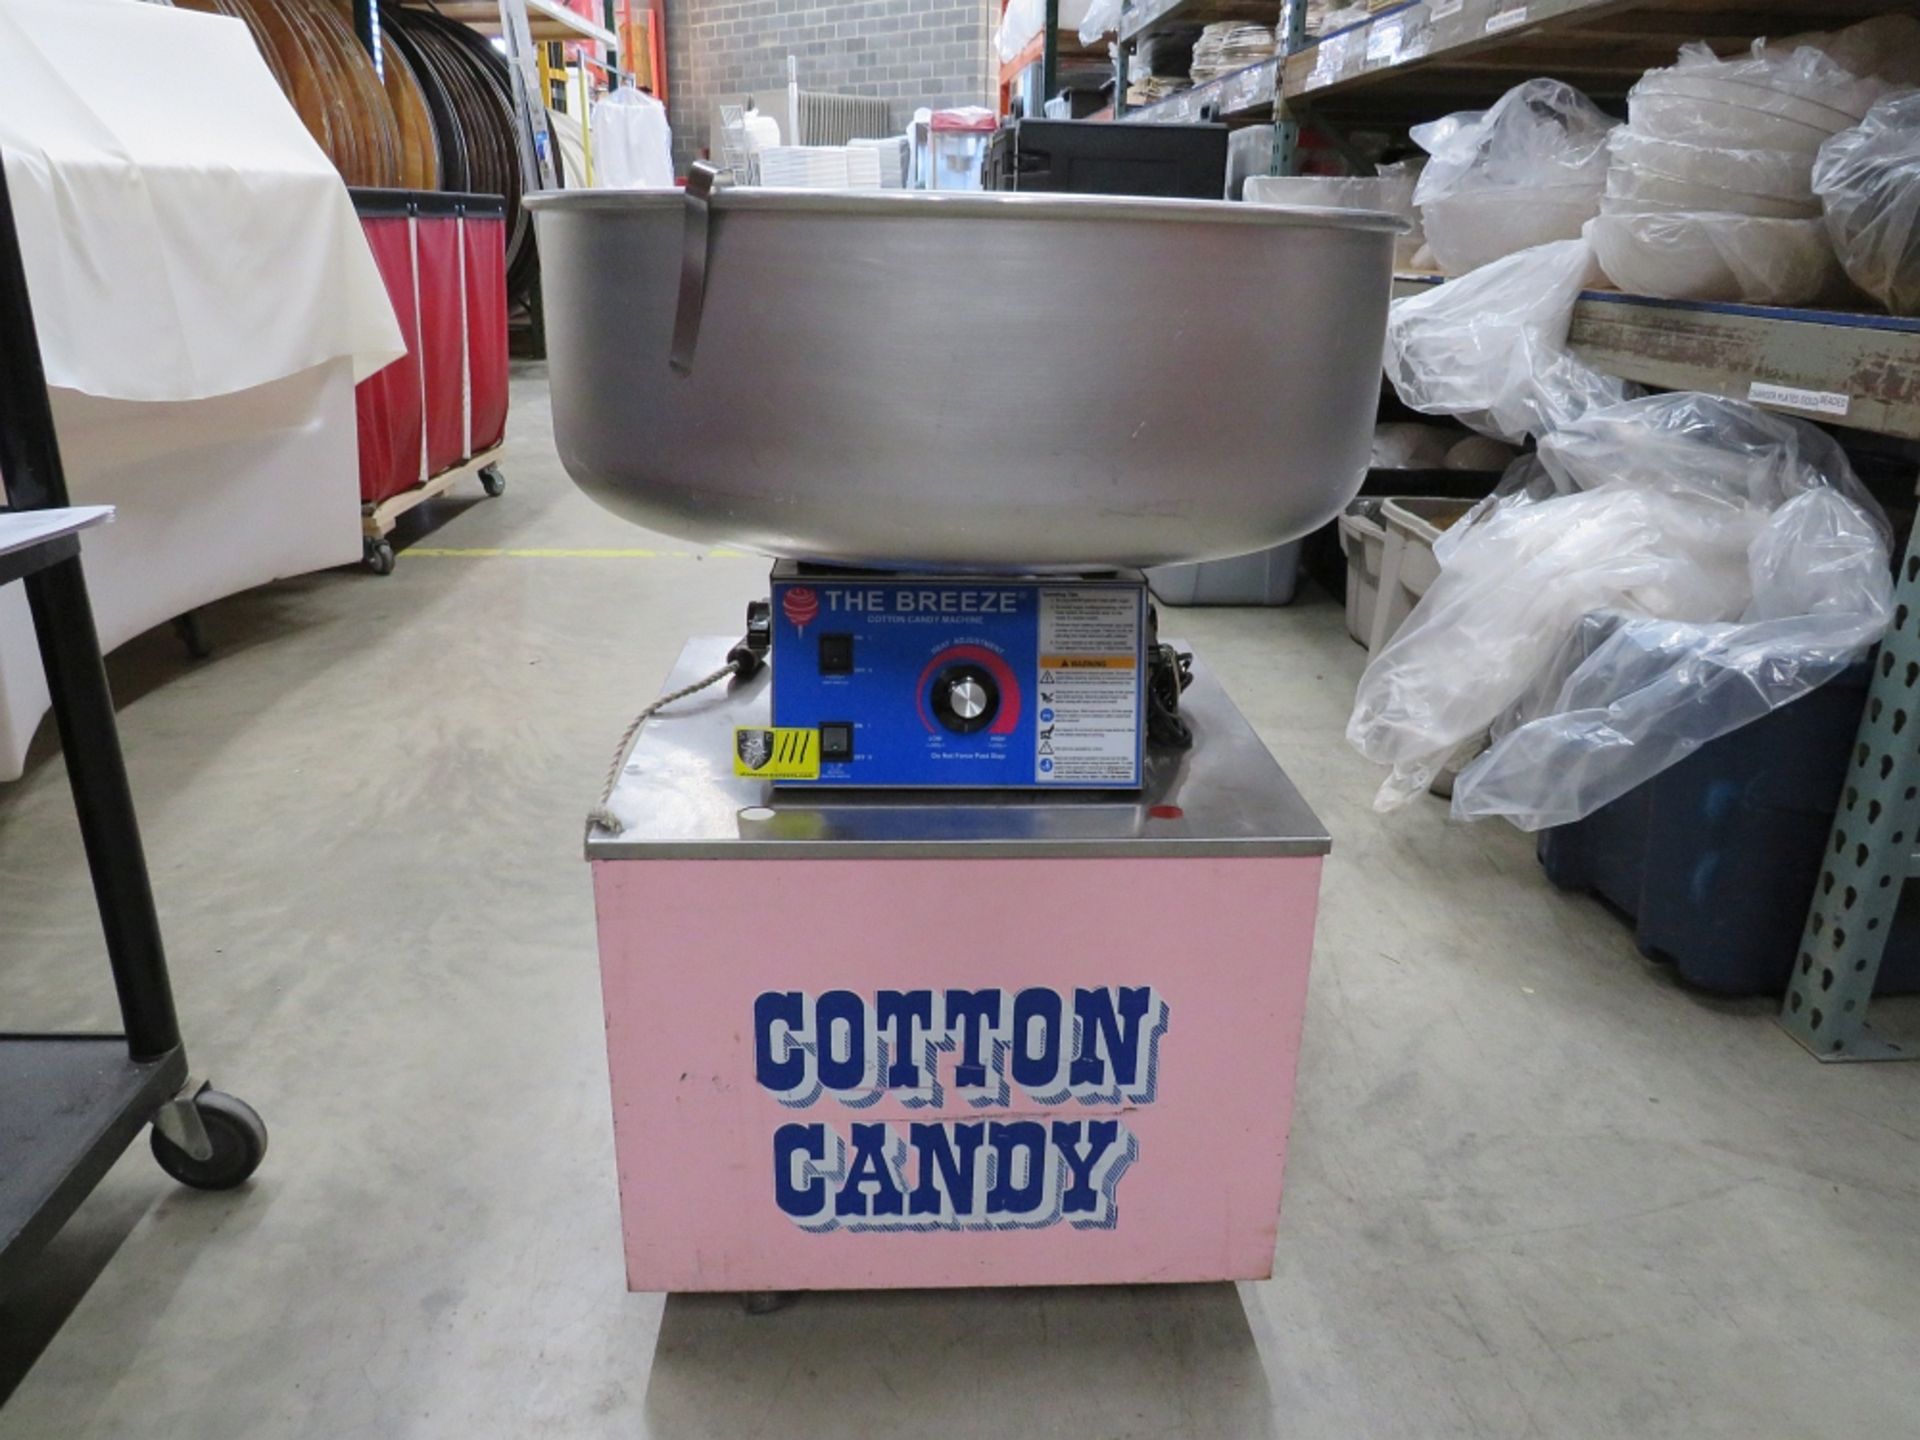 GOLD MEDAL COTTON CANDY MACHINE-BREEZE, SN 3030-00-001-711 W/ PINK STAND